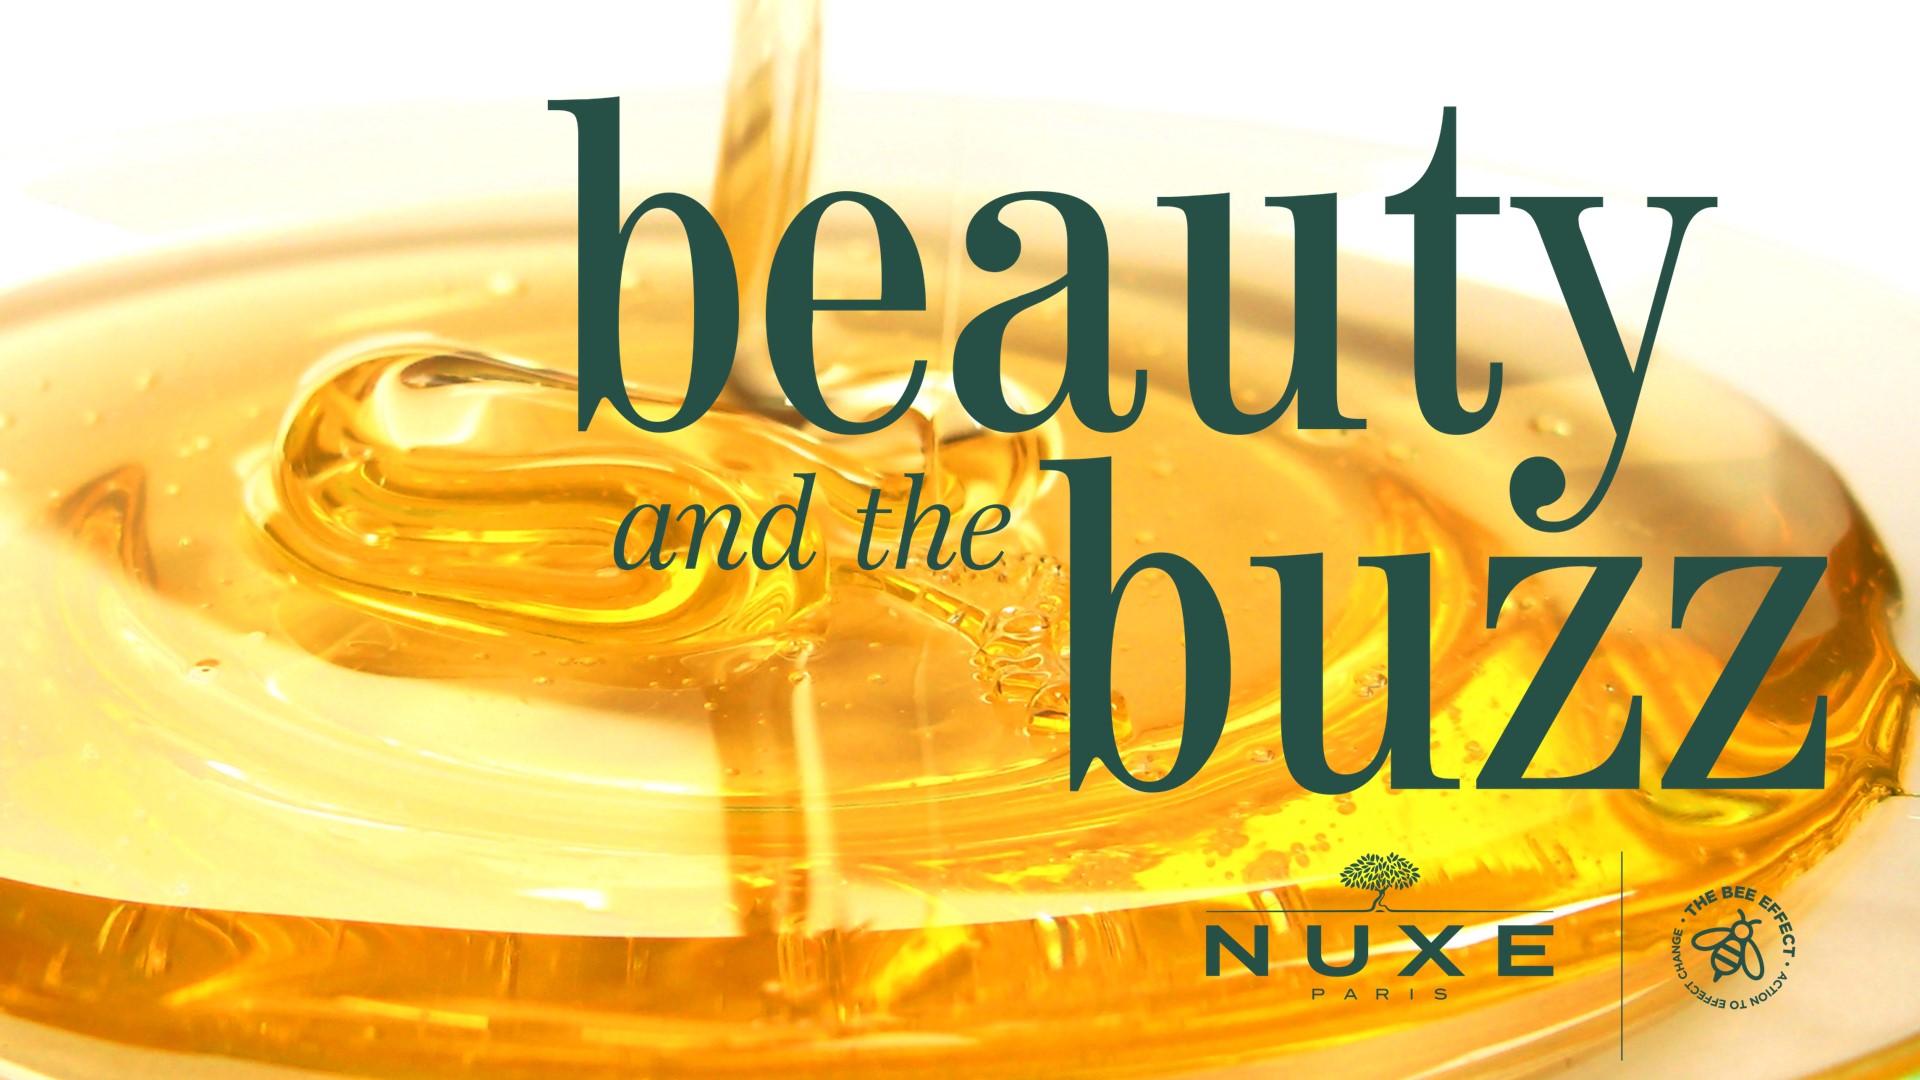 Stand a chance to win one of four Reve de Miel product bags from NUXE valued at R3000.